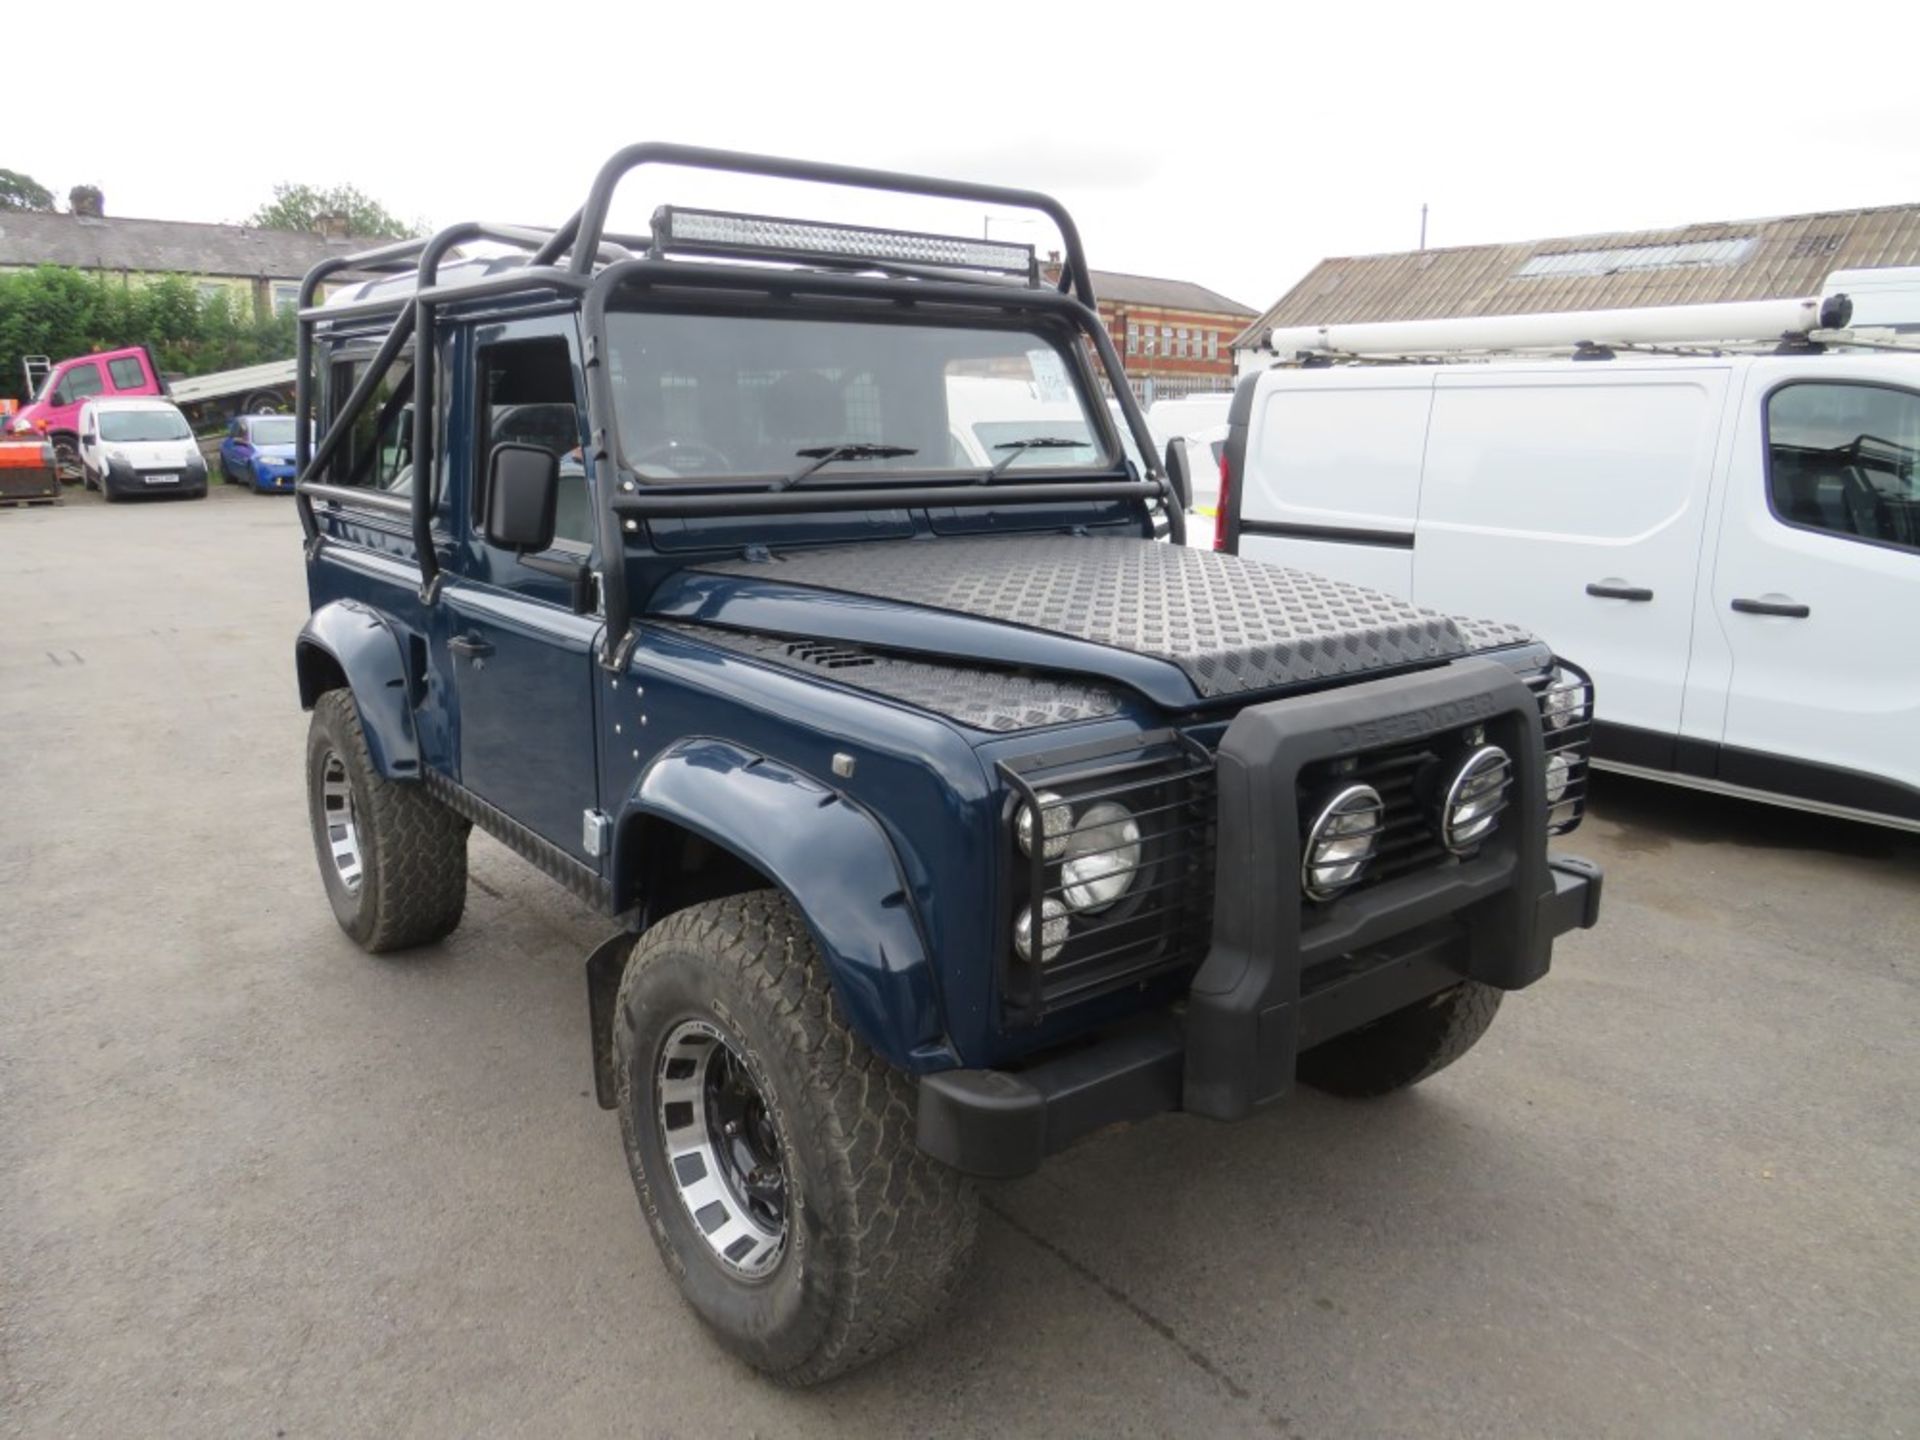 G reg LAND ROVER 90 4C SW DT DIESEL 4 X 4, NEW GLAV CHASSIS, 300 TDI ENGINE, 200 GEARBOX, NEW DOORS